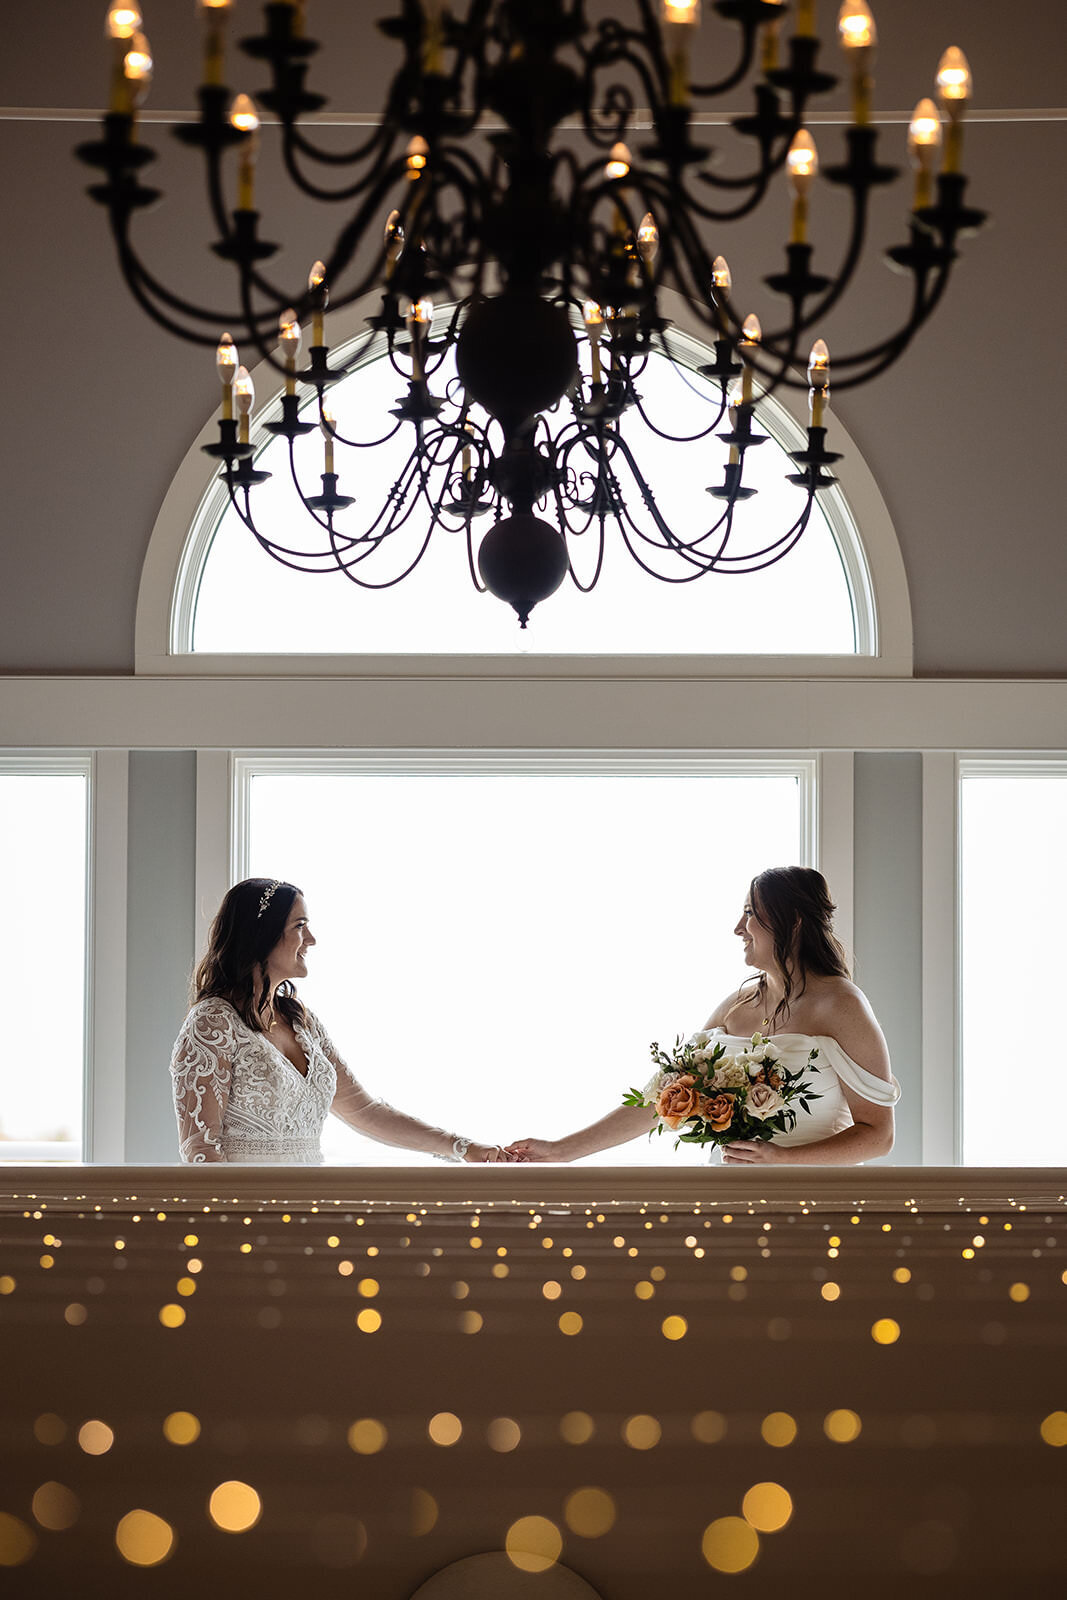 Two brides facing each other holding hands, with a chandelier above and twinkling lights below, creating a romantic atmosphere.